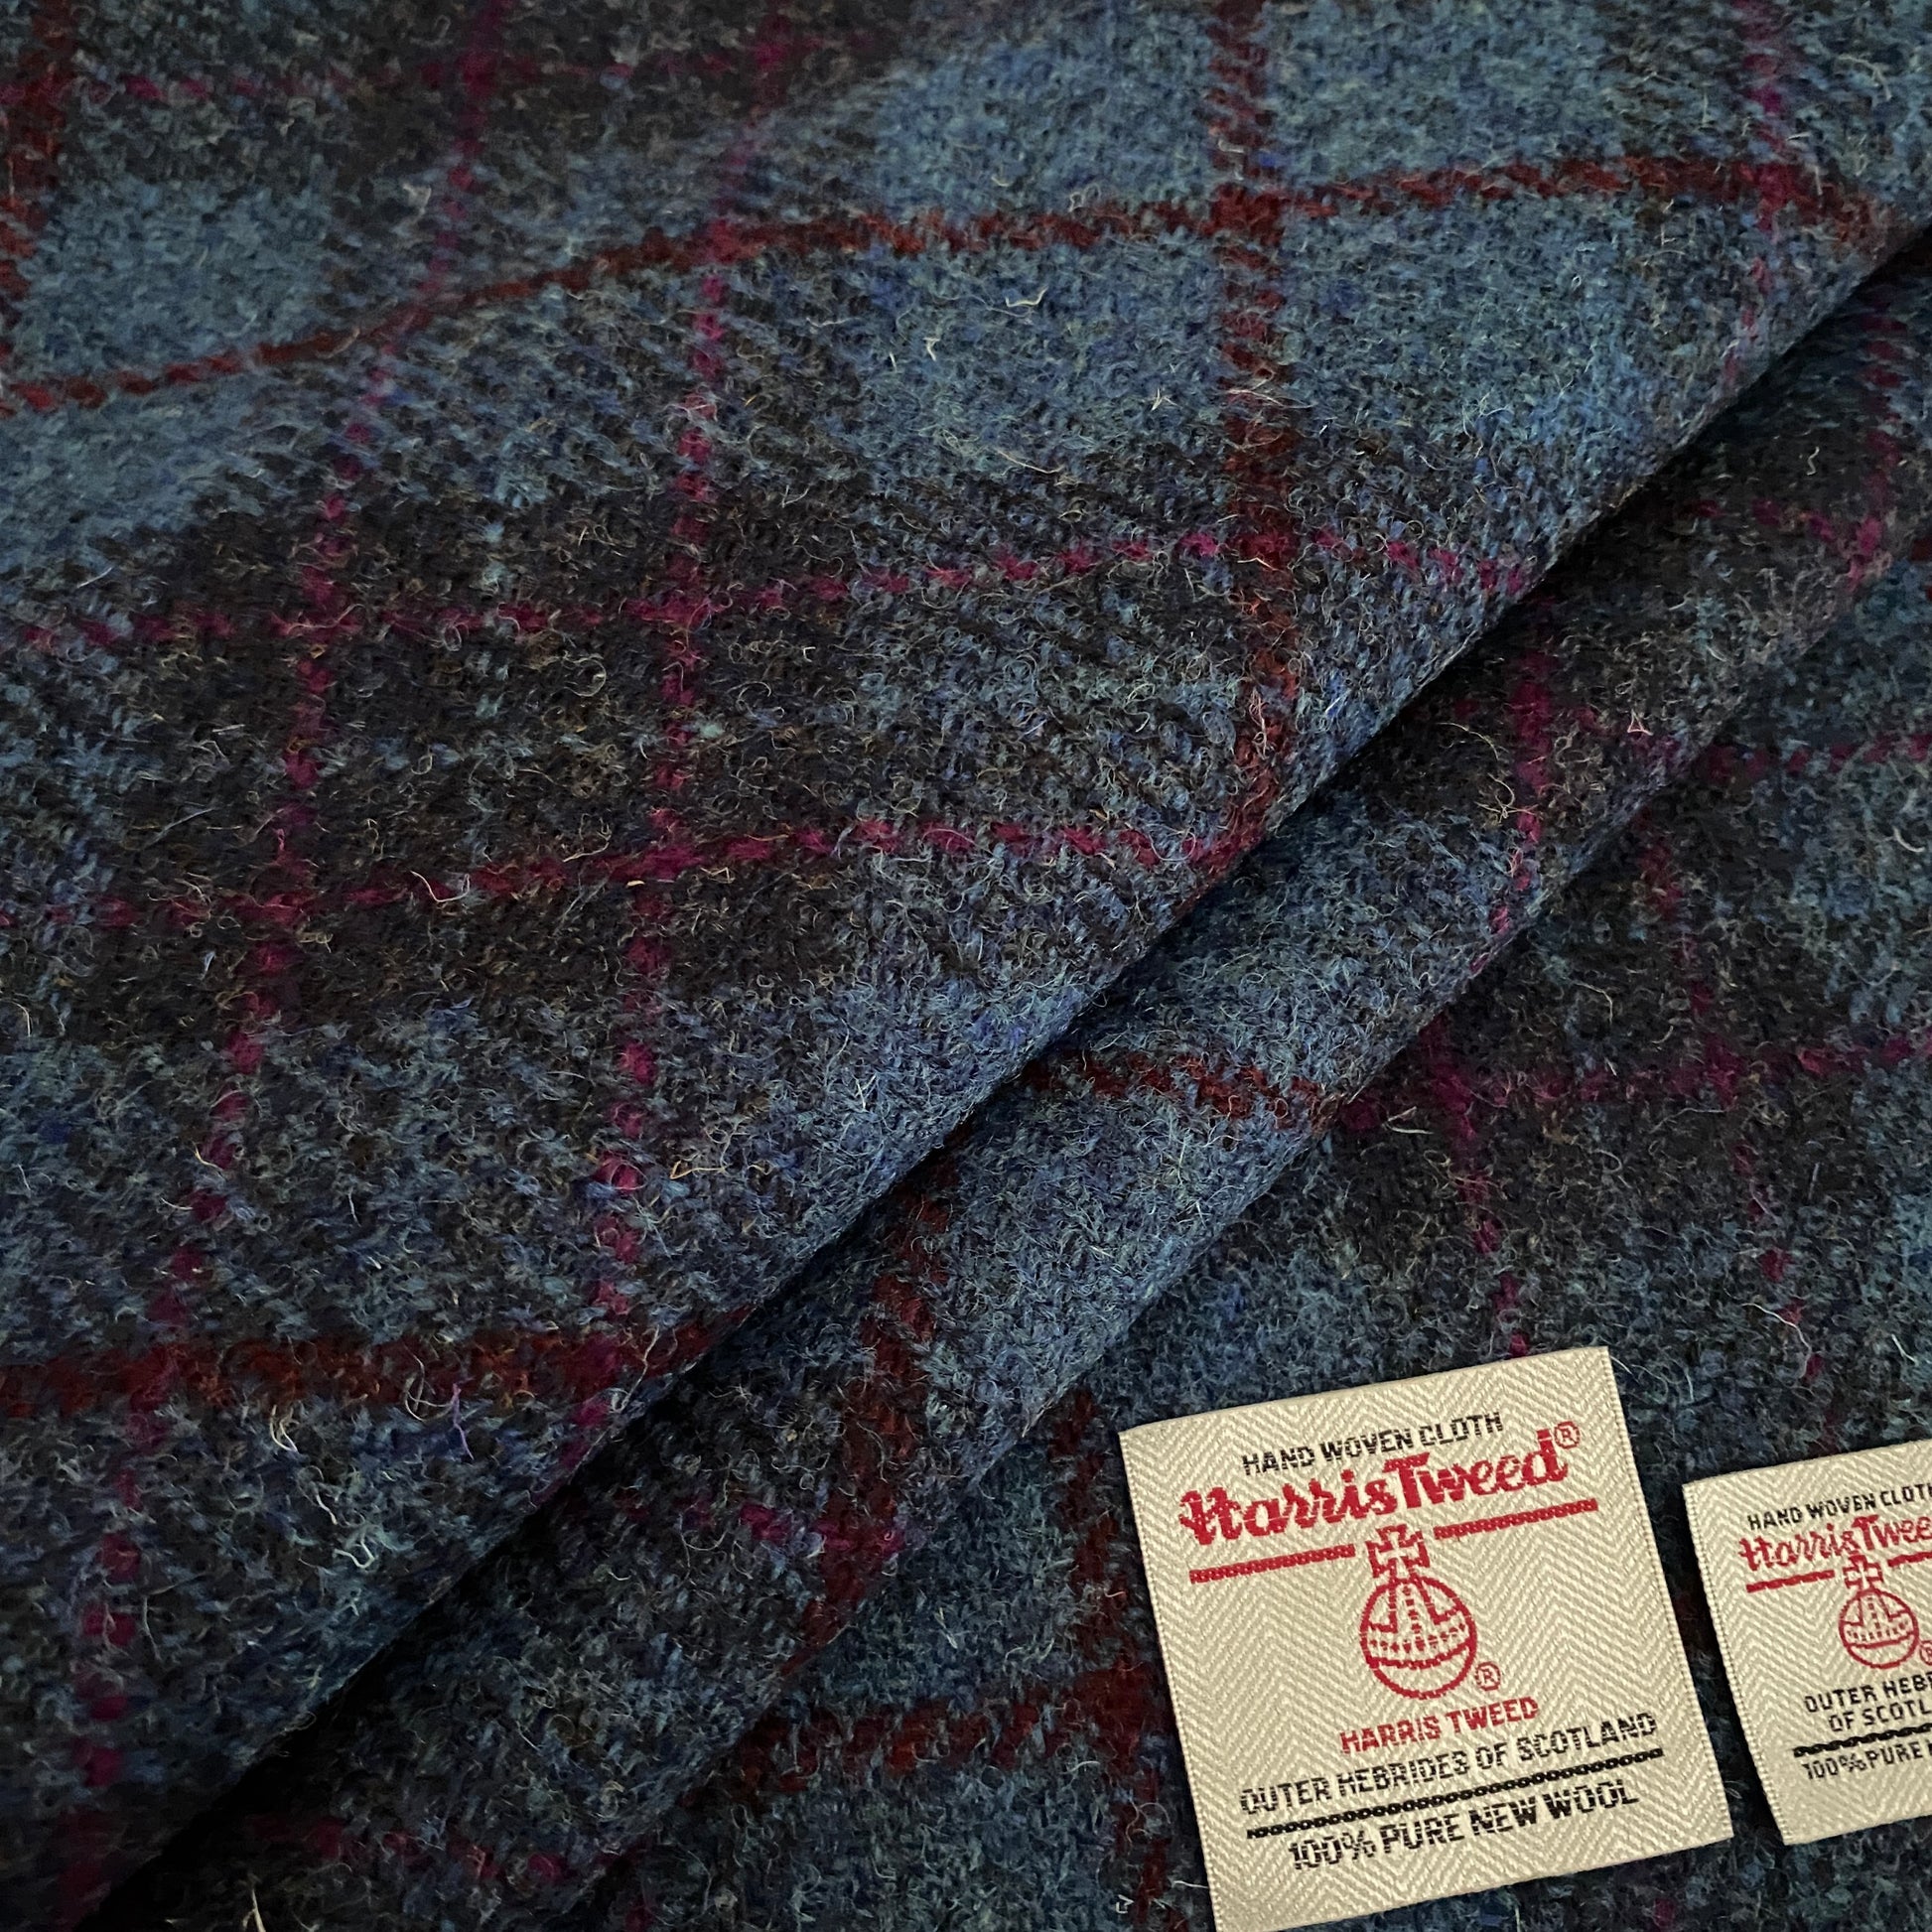 Harris Tweed Dark Blue with Red Overcheck Fabric and Authenticity